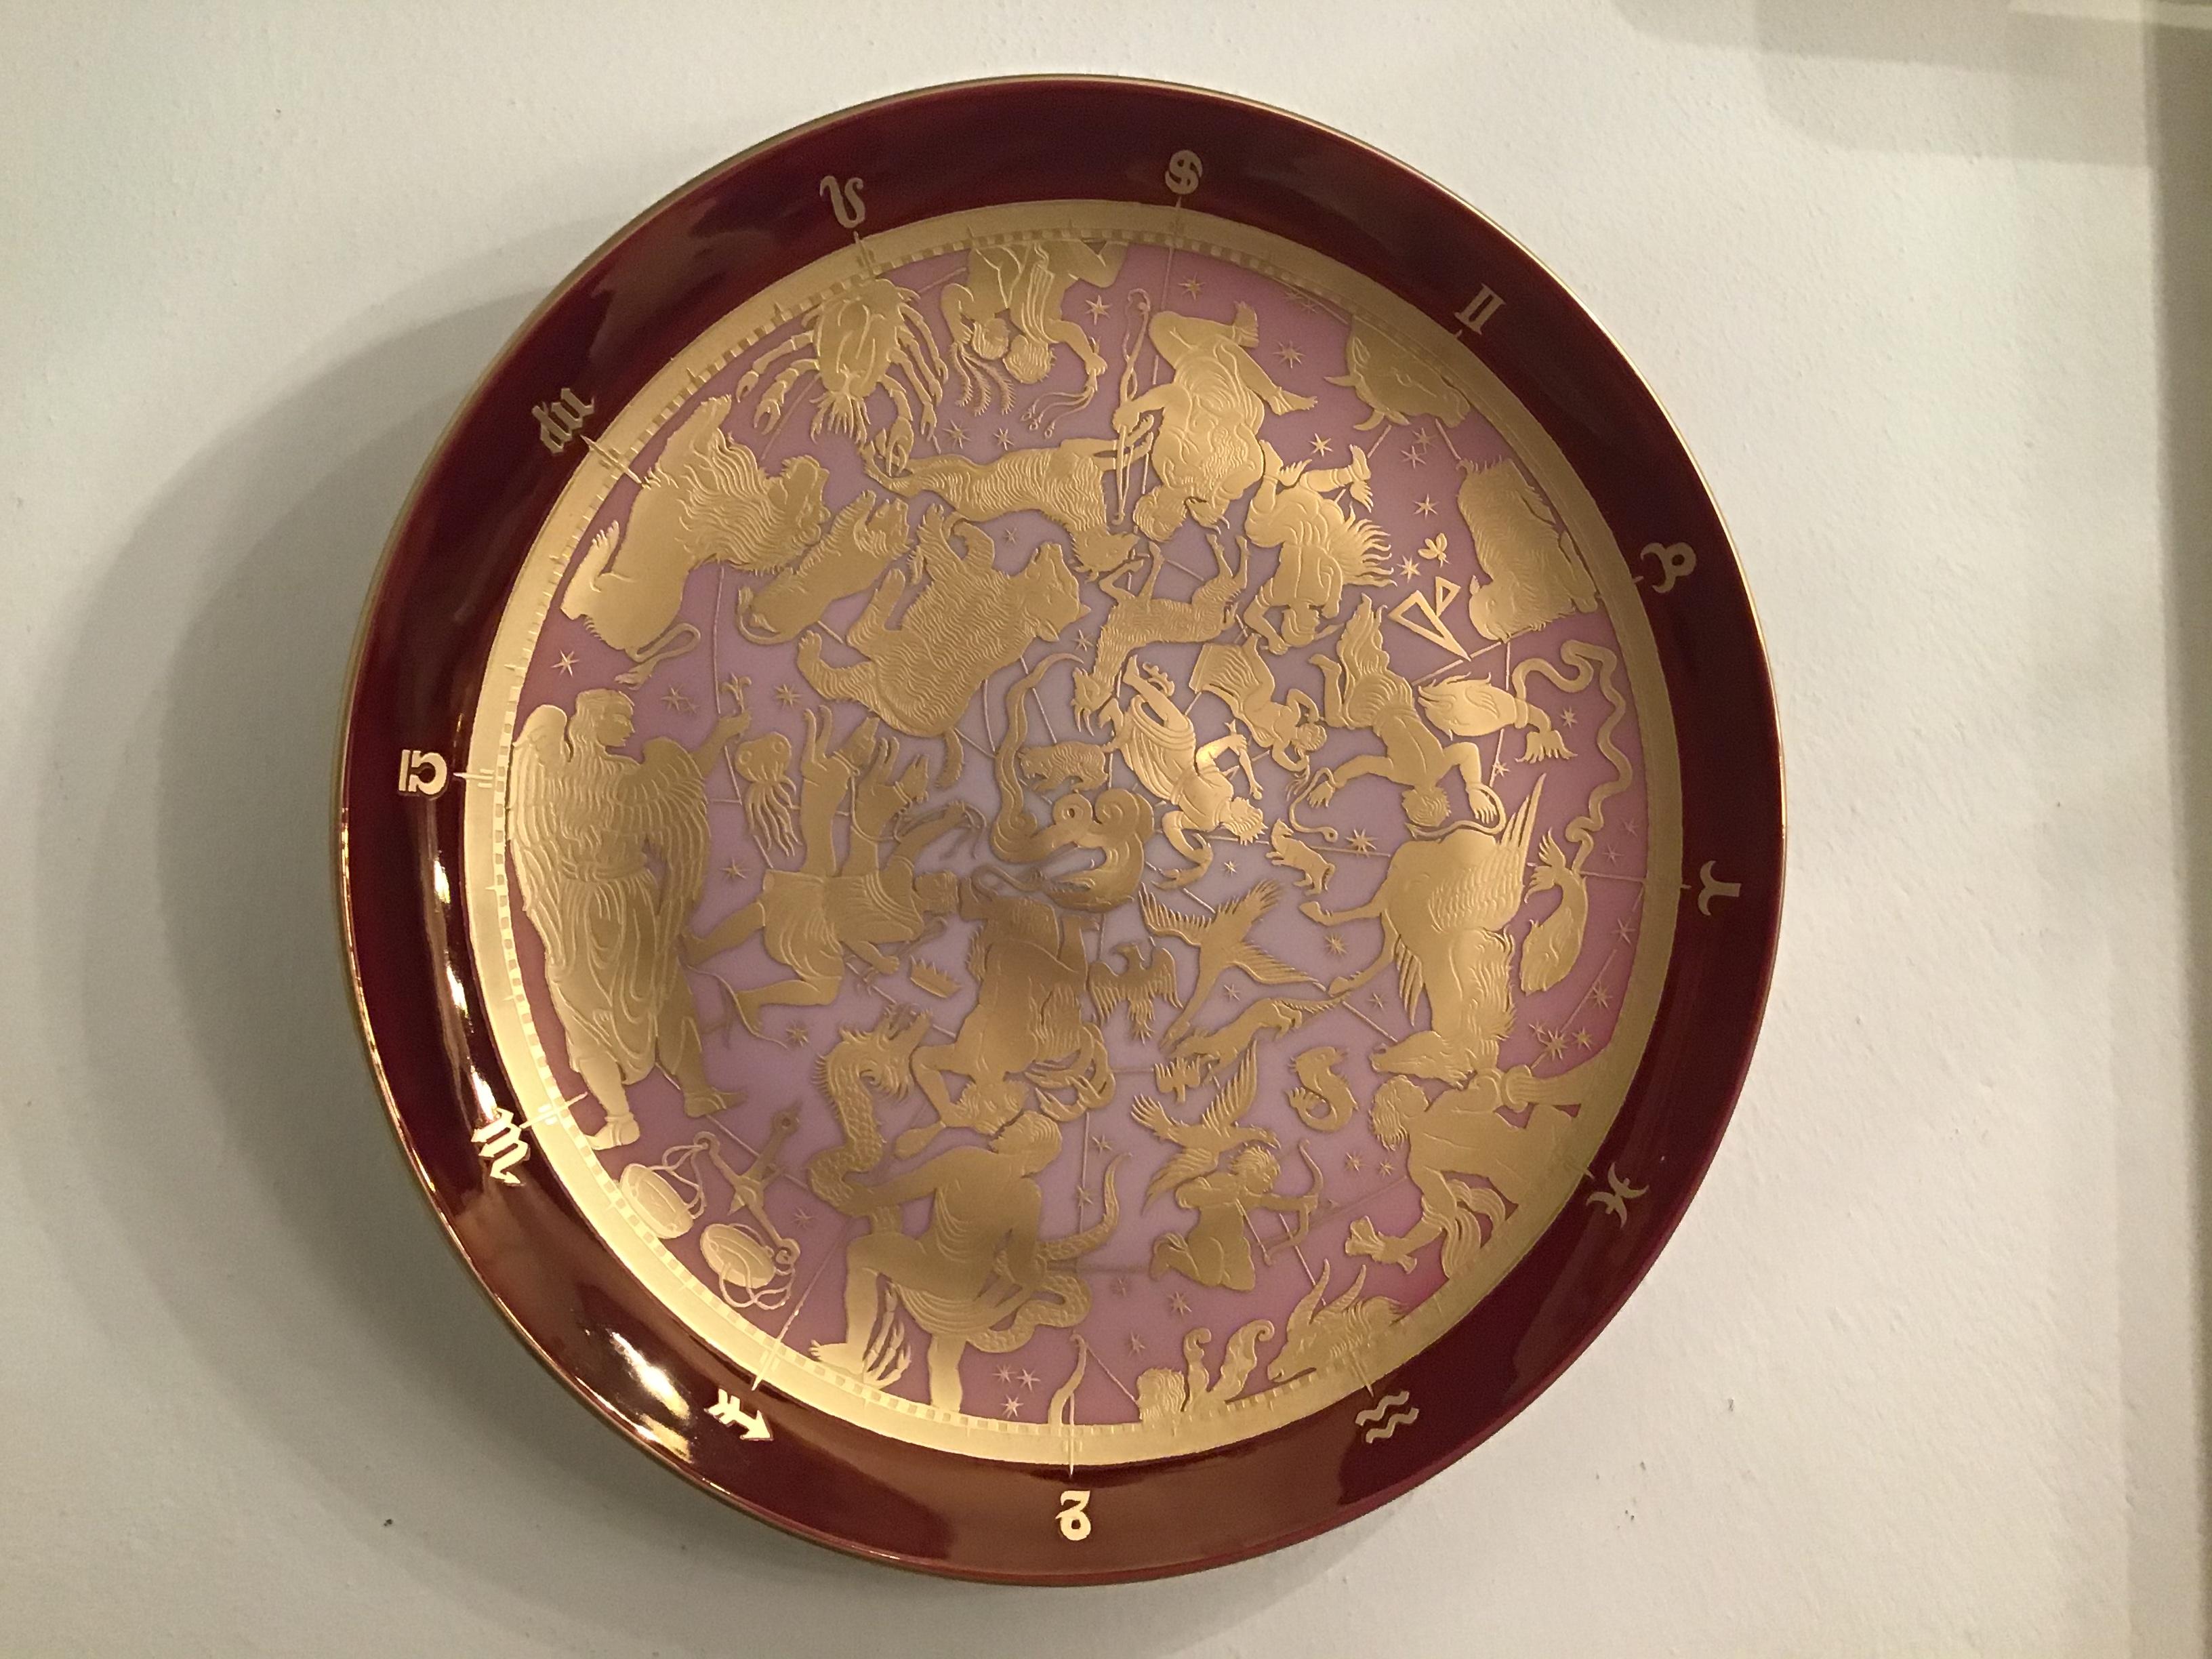 Morbelli Porcelain Wall Plate “Planisfero Celeste” Worked with Pure Gold 1960 It For Sale 5